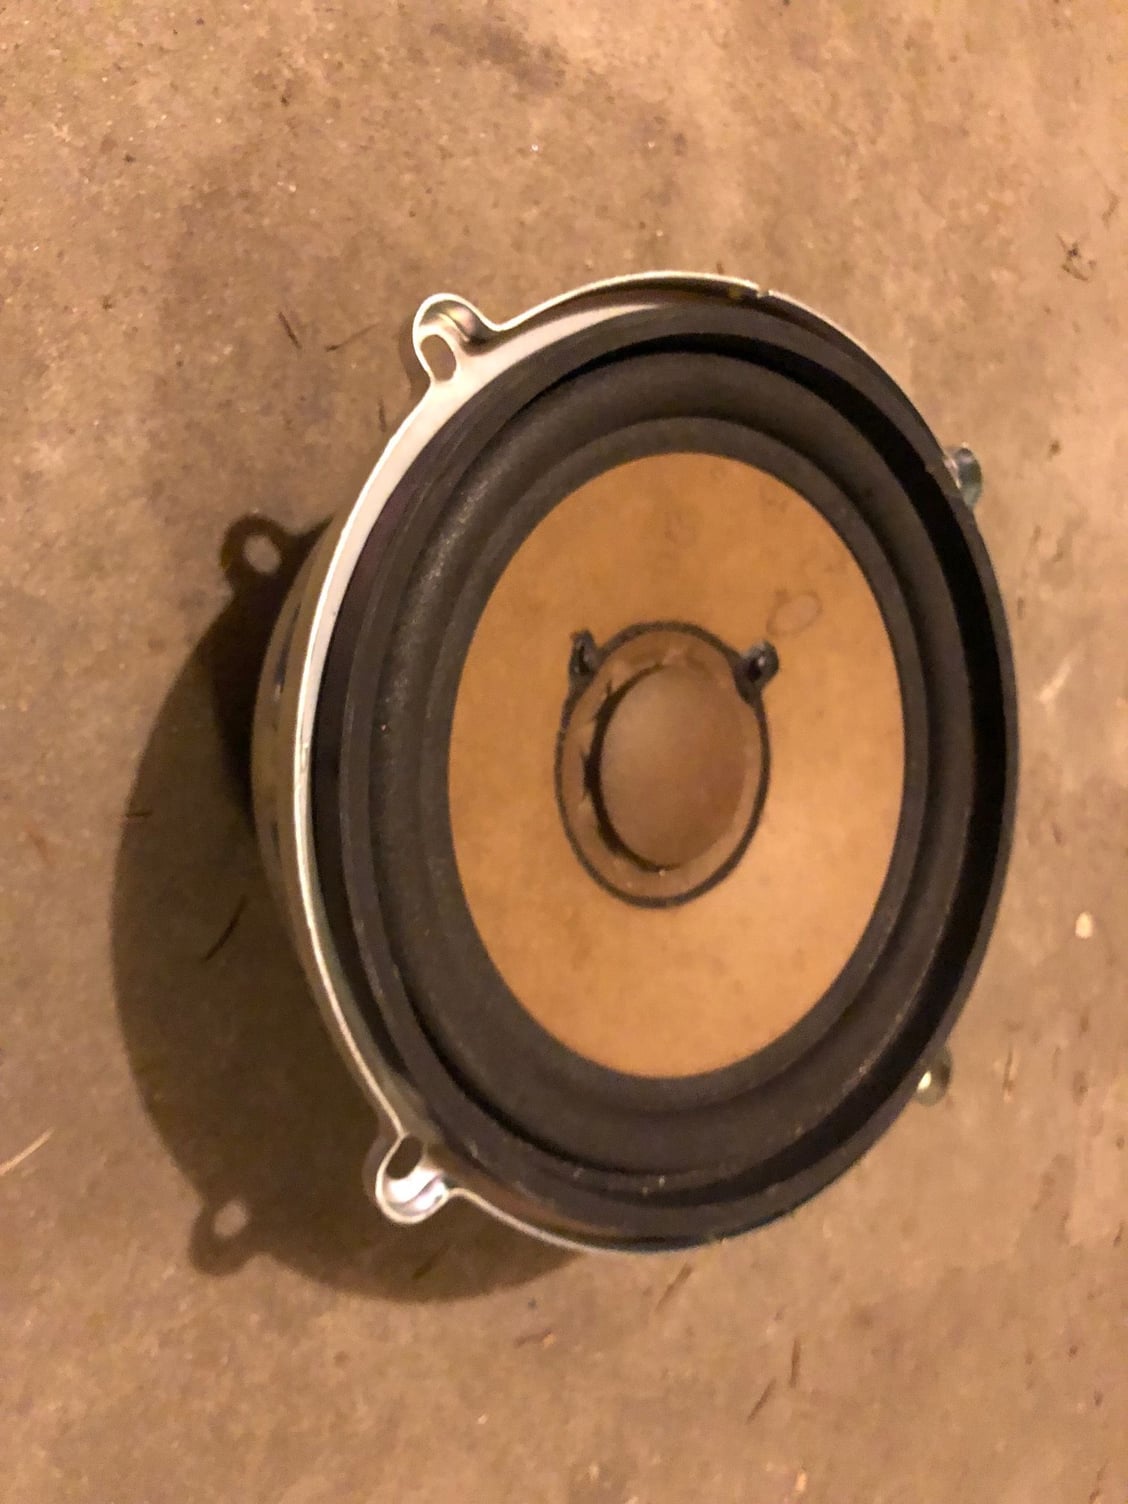 Audio Video/Electronics - EXPIRED: FS: 3G Acura TL OEM Subwoofer - Used - 2004 to 2008 Acura TL - Baraboo, WI 53913, United States